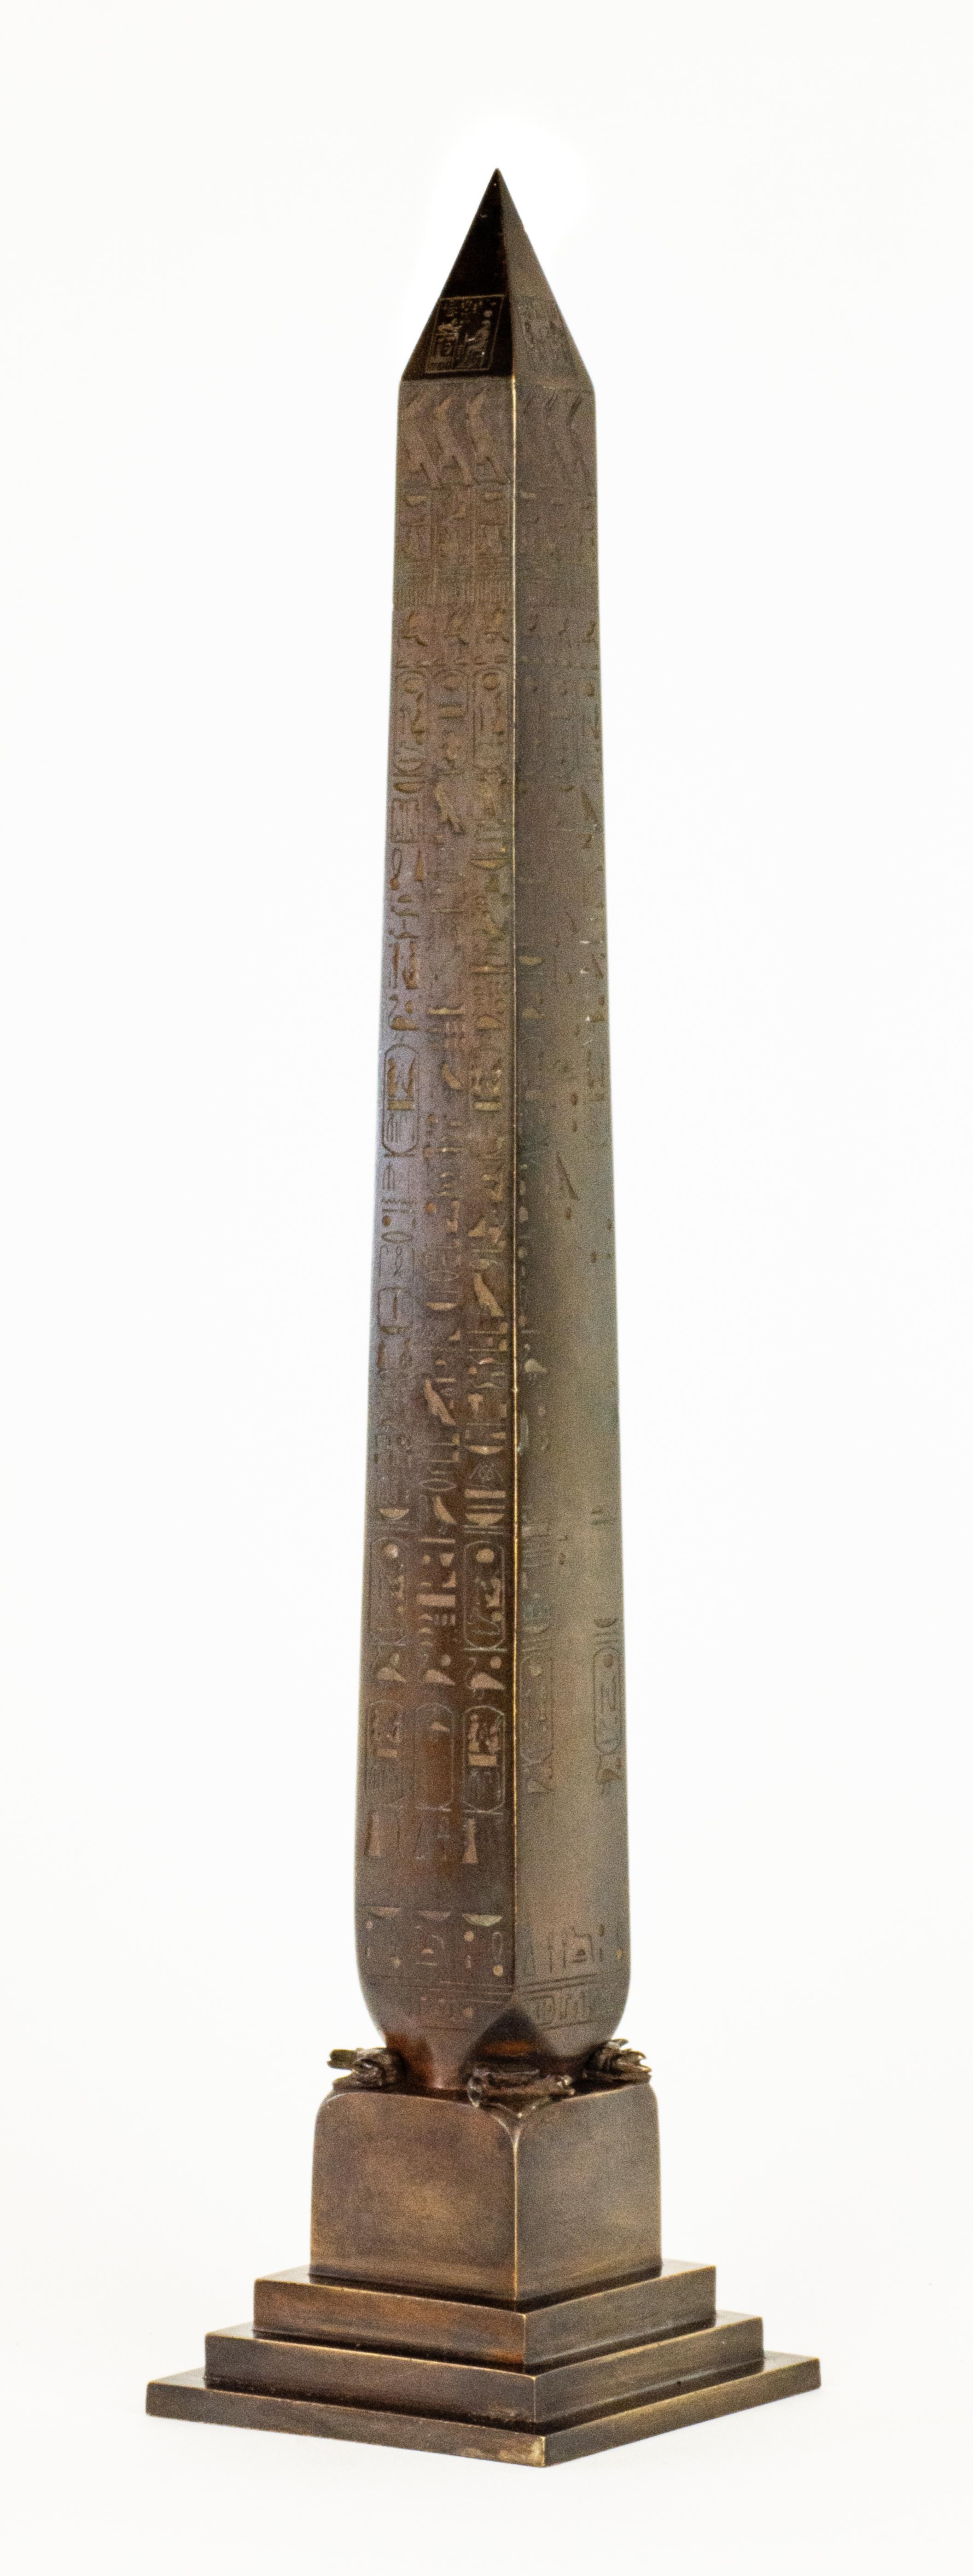 About

In 1879, under the sponsorship of business mogul William Vanderbilt, naval engineer Henry Gorringe set sail for Alexandria, Egypt, to secure the ancient Obelisk of Thutmose III (soon to be called Cleopatra’s Needle) and bring the 200 ton